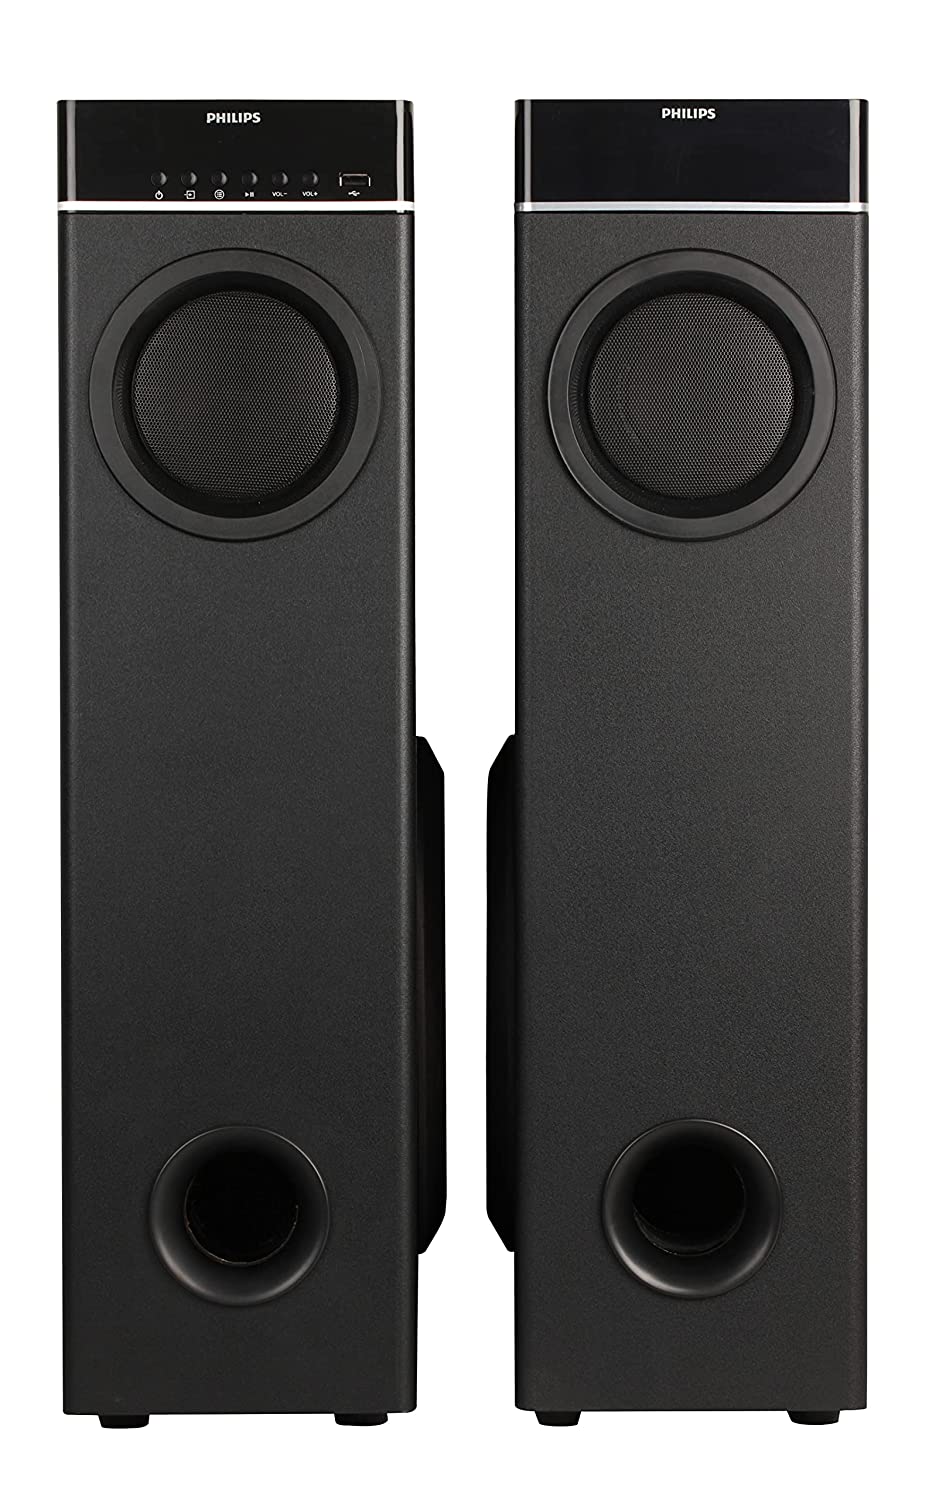 Philips Audio SPA9070/94 70 W Tower Speaker with Optical Input and Mic, Black